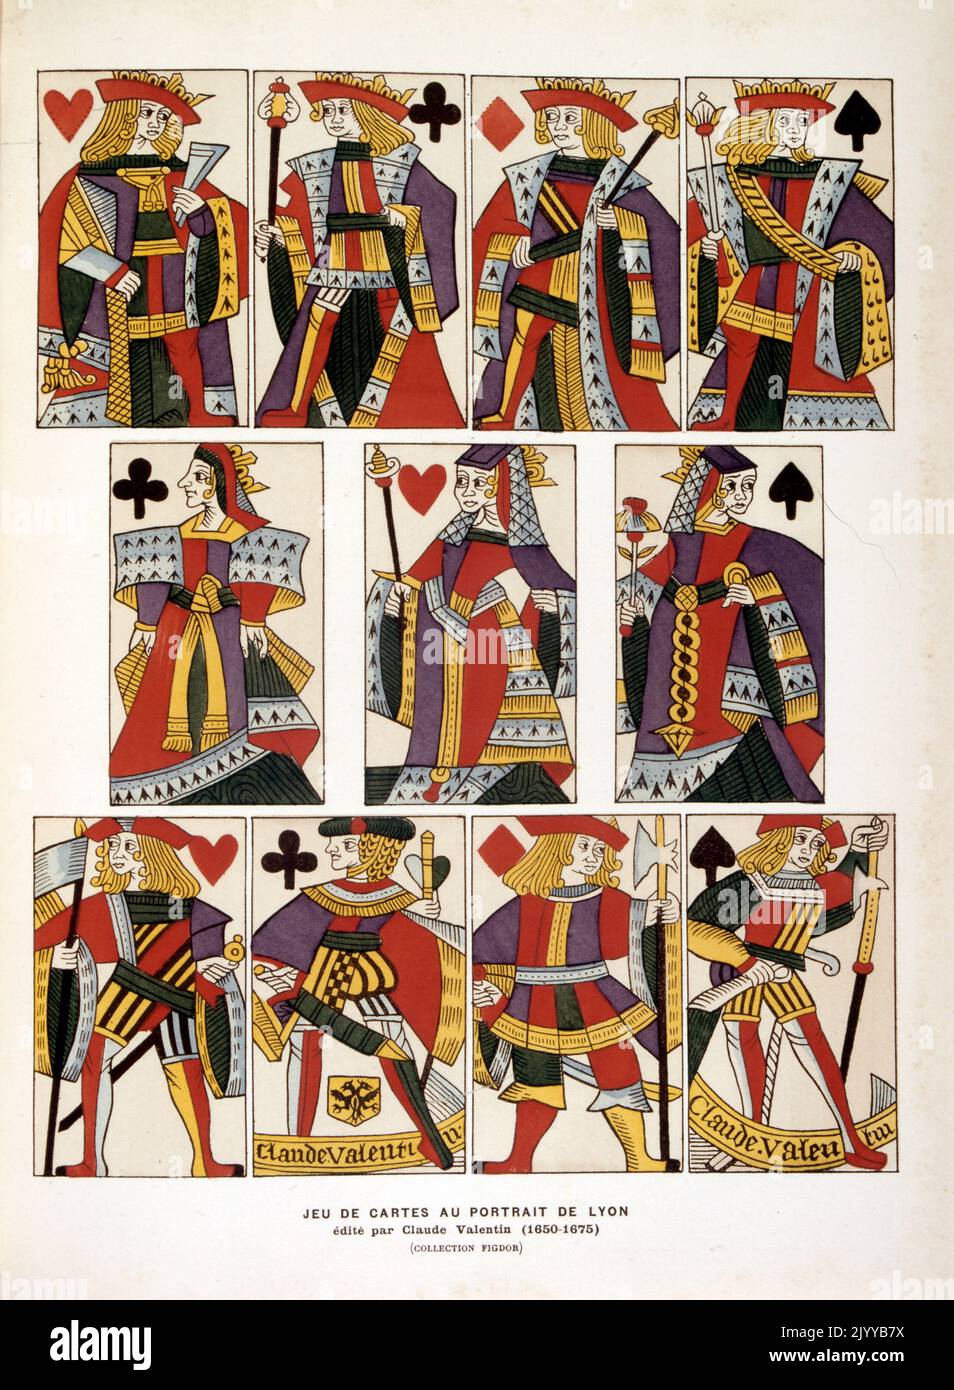 Coloured Illustration of playing cards depicting portraits of Lyon published by Claude Valentin (1650-1675). Stock Photo